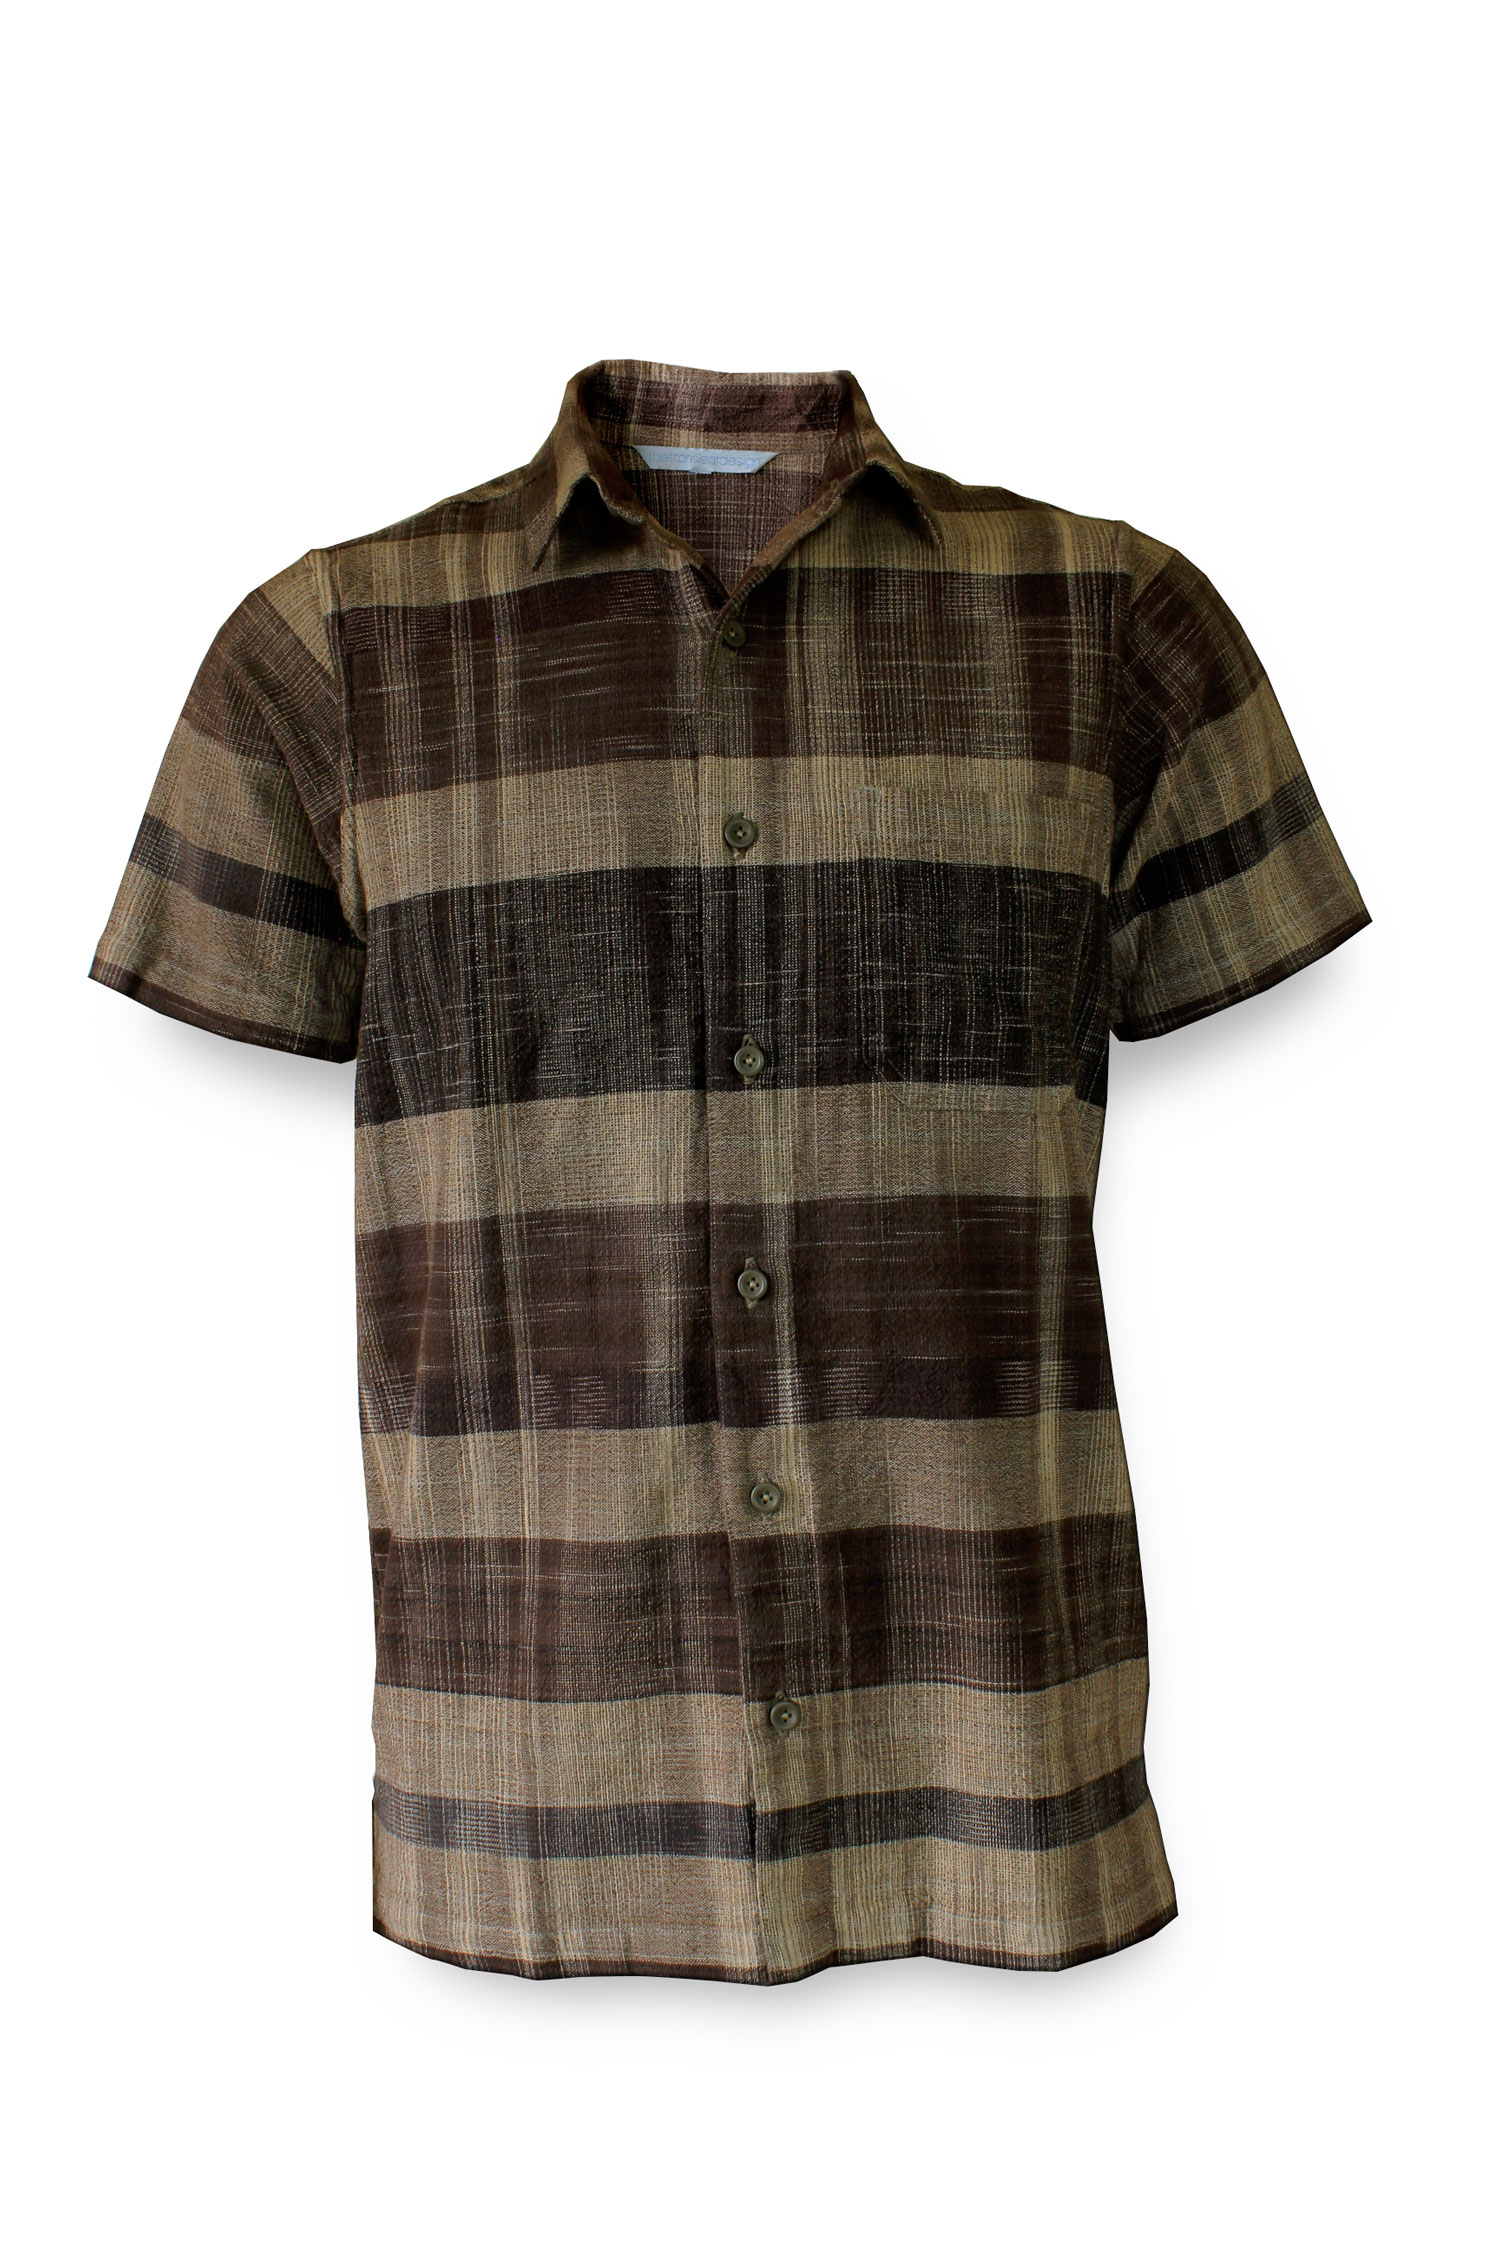 Principal Tee (brown handwoven cotton) - The Transient Design